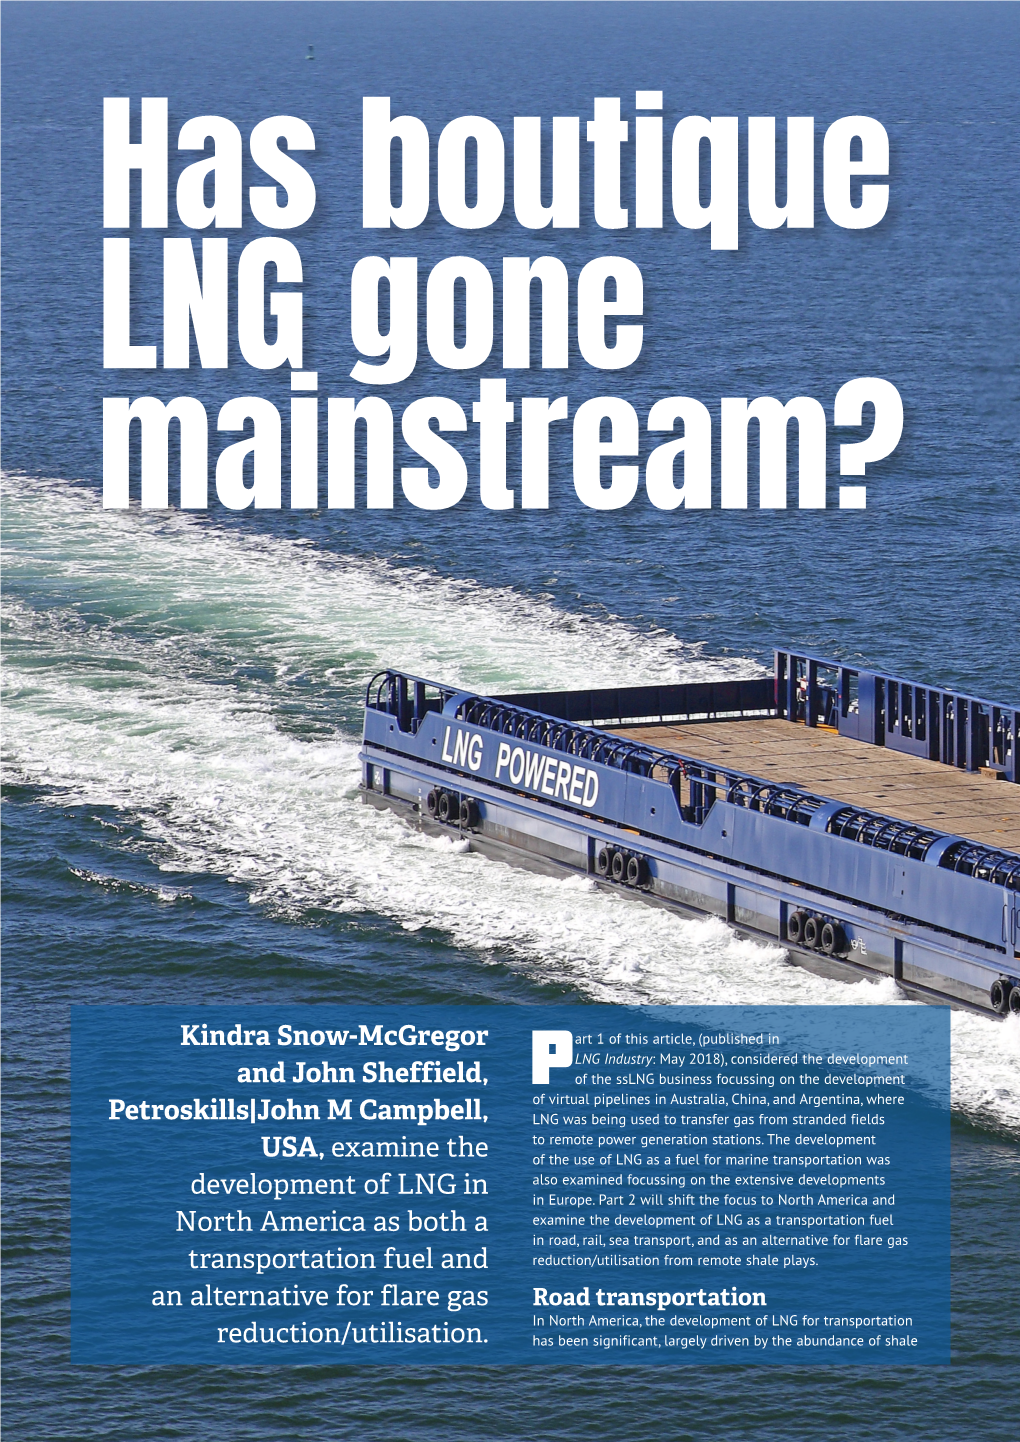 Has Boutique LNG Gone Mainstream?